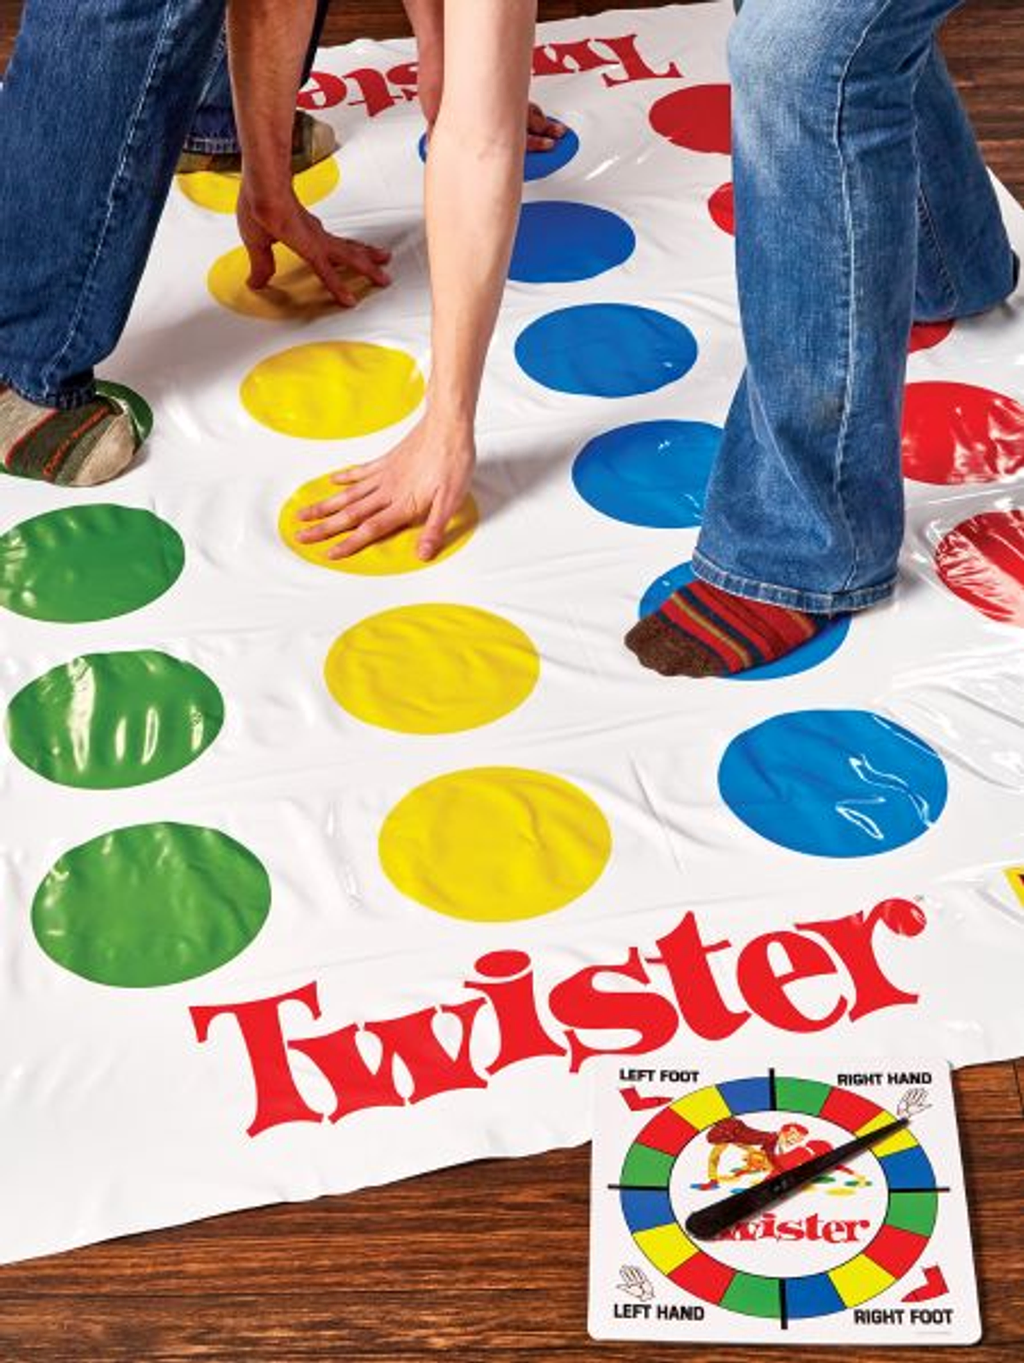 Fun Twister game for a great time with friends and family available at BIYU